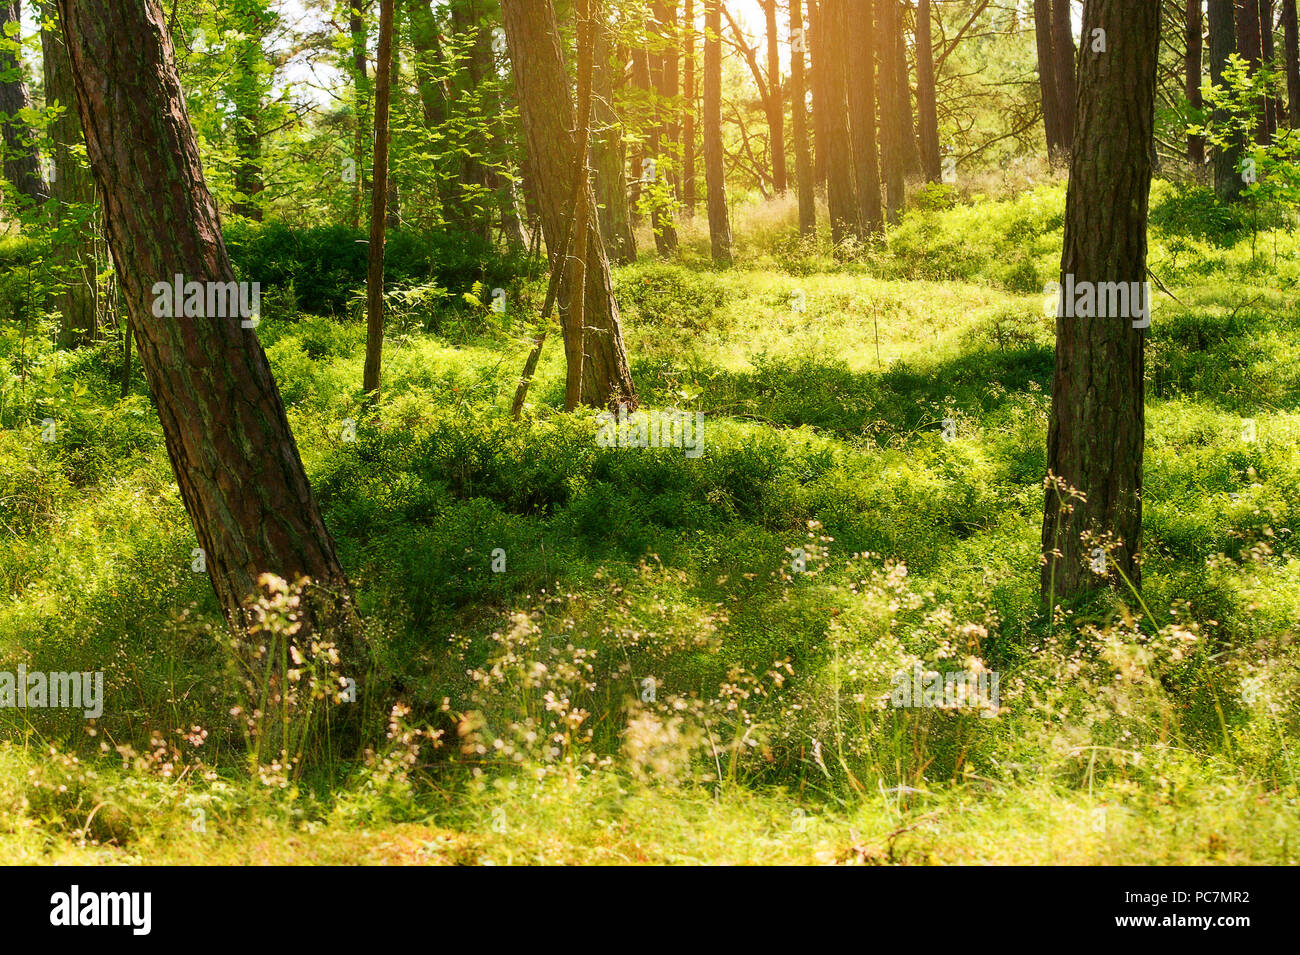 Summer pinewood. Scots or Scotch pine Pinus sylvestris trees in evergreen coniferous forest. Stegna, Pomerania, northern Poland. Stock Photo